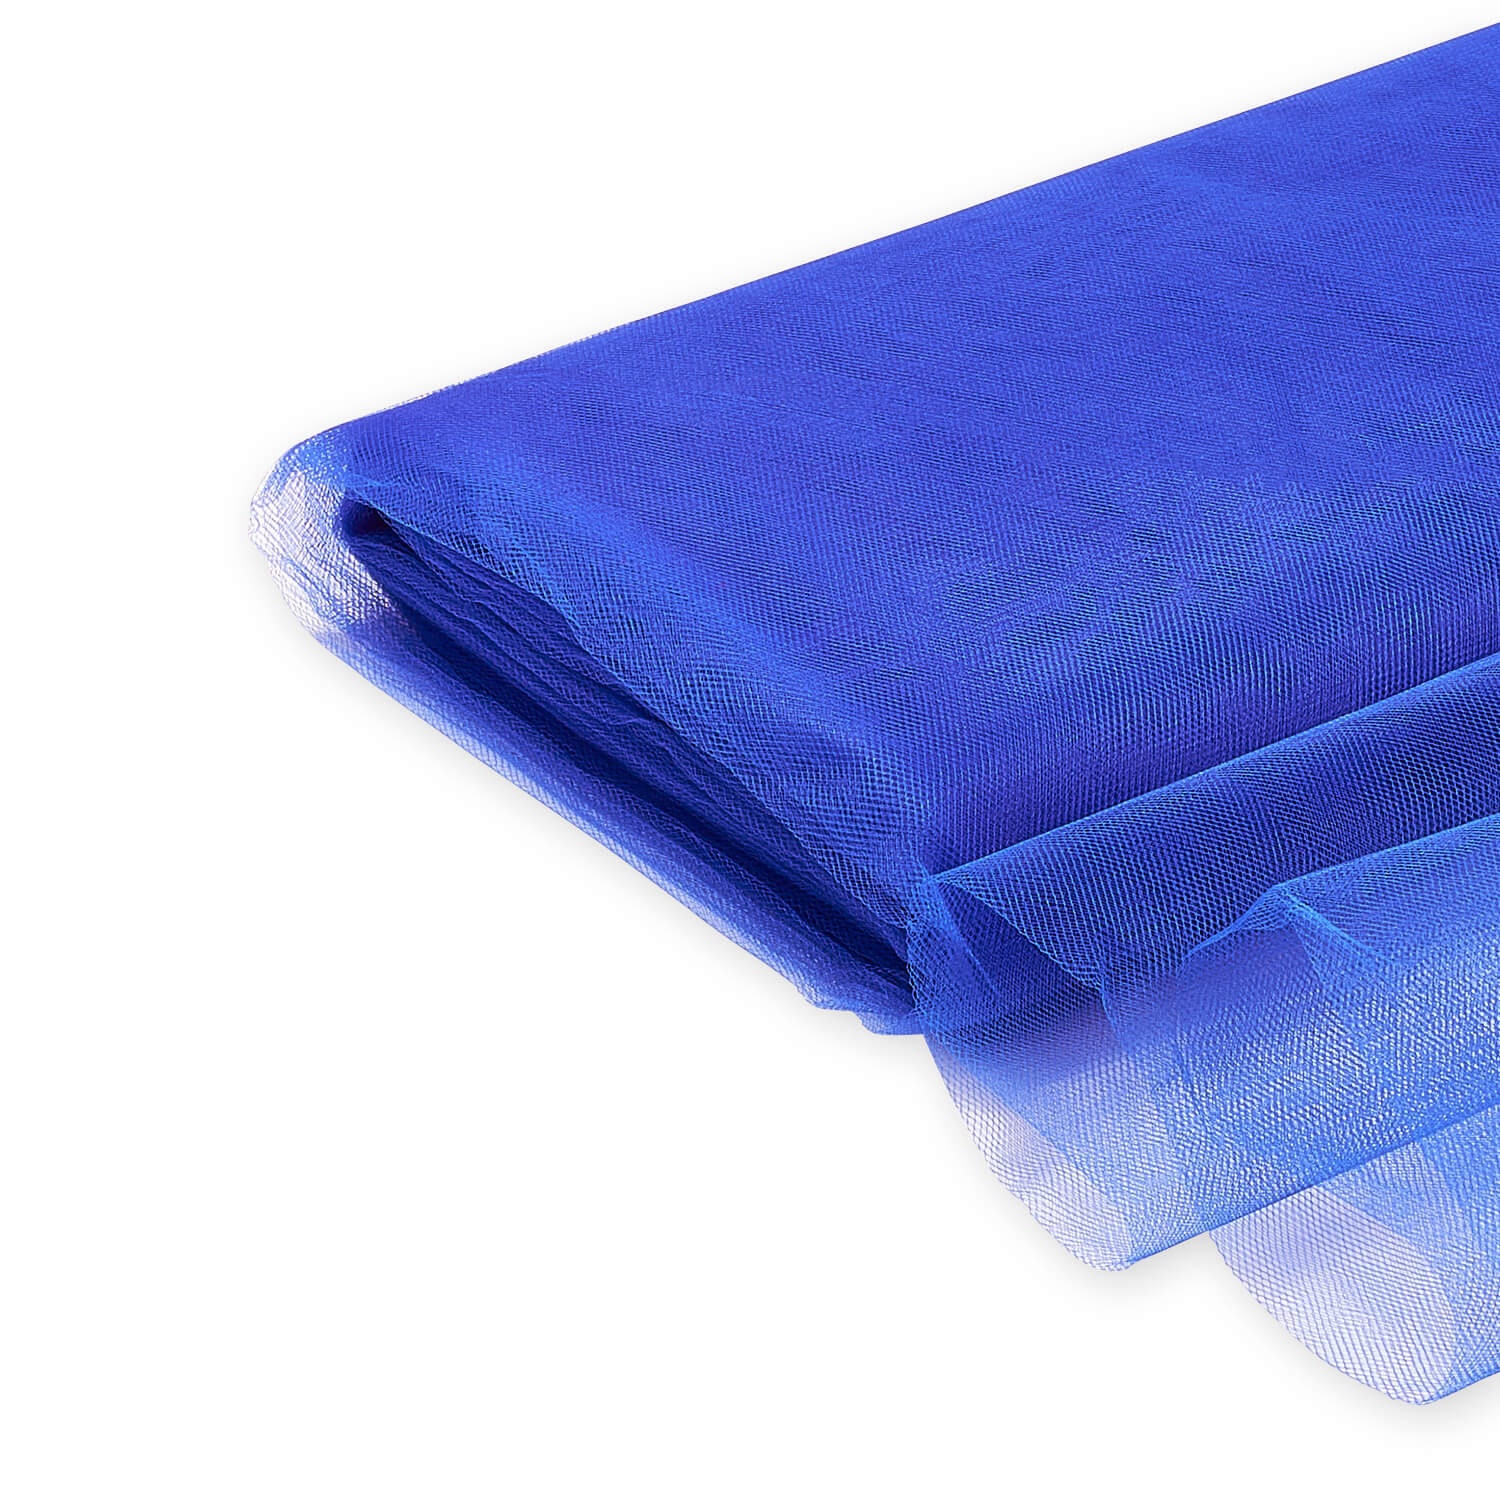 Royal Blue Tulle Fabric